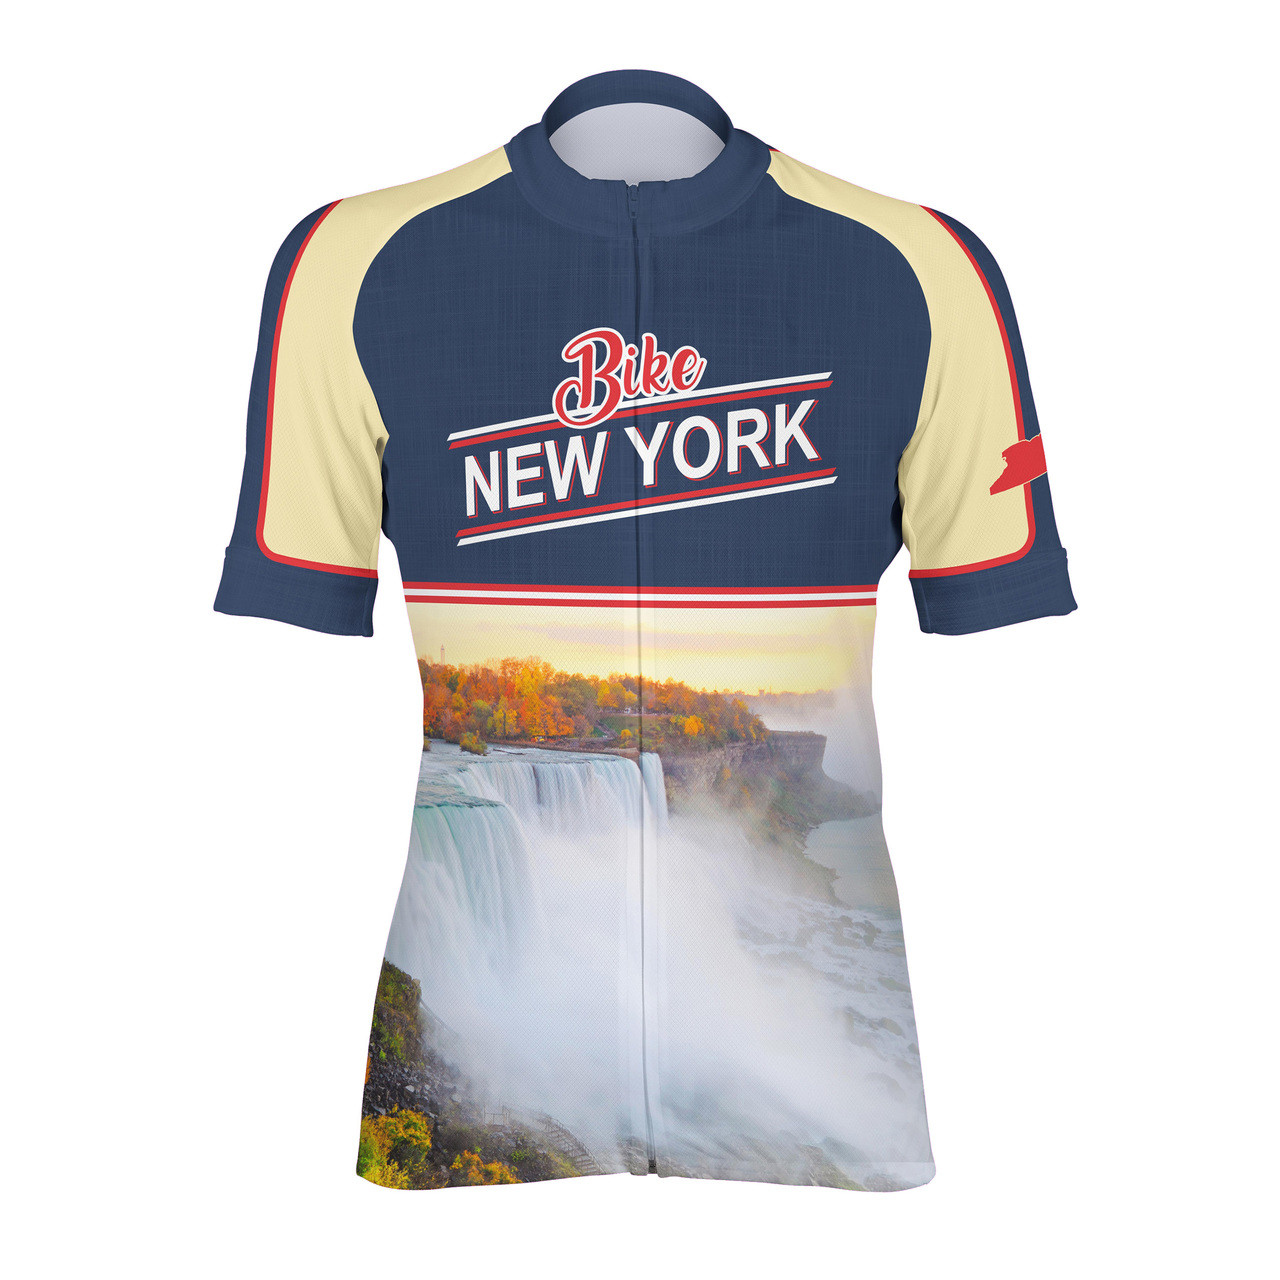 Sublimated Jersey Design & Custom Sports Uniforms -The Edge - The